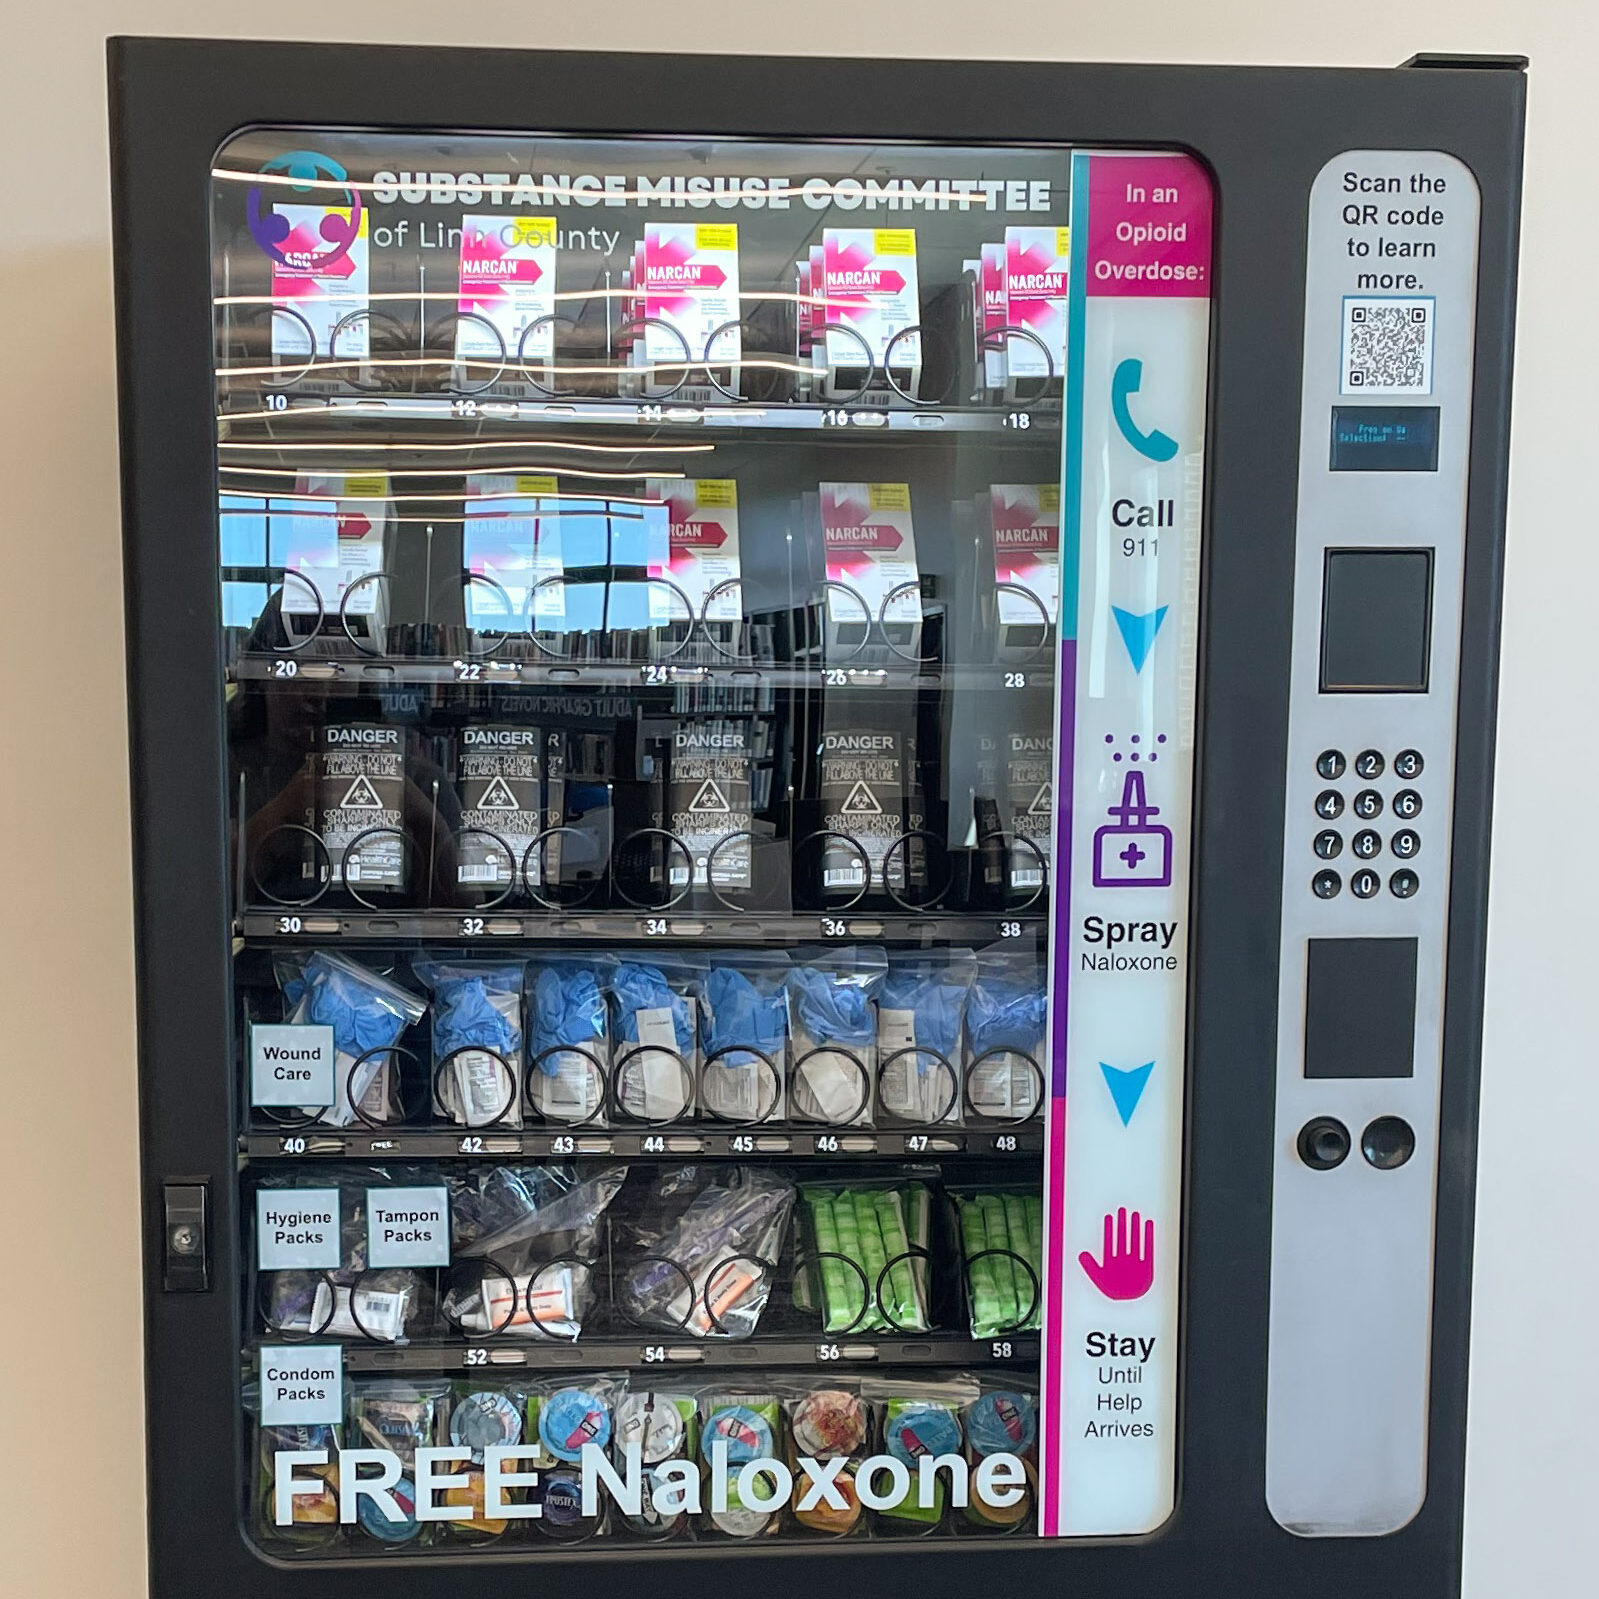 MPL Partners with Linn County to Join Vending Machine Program